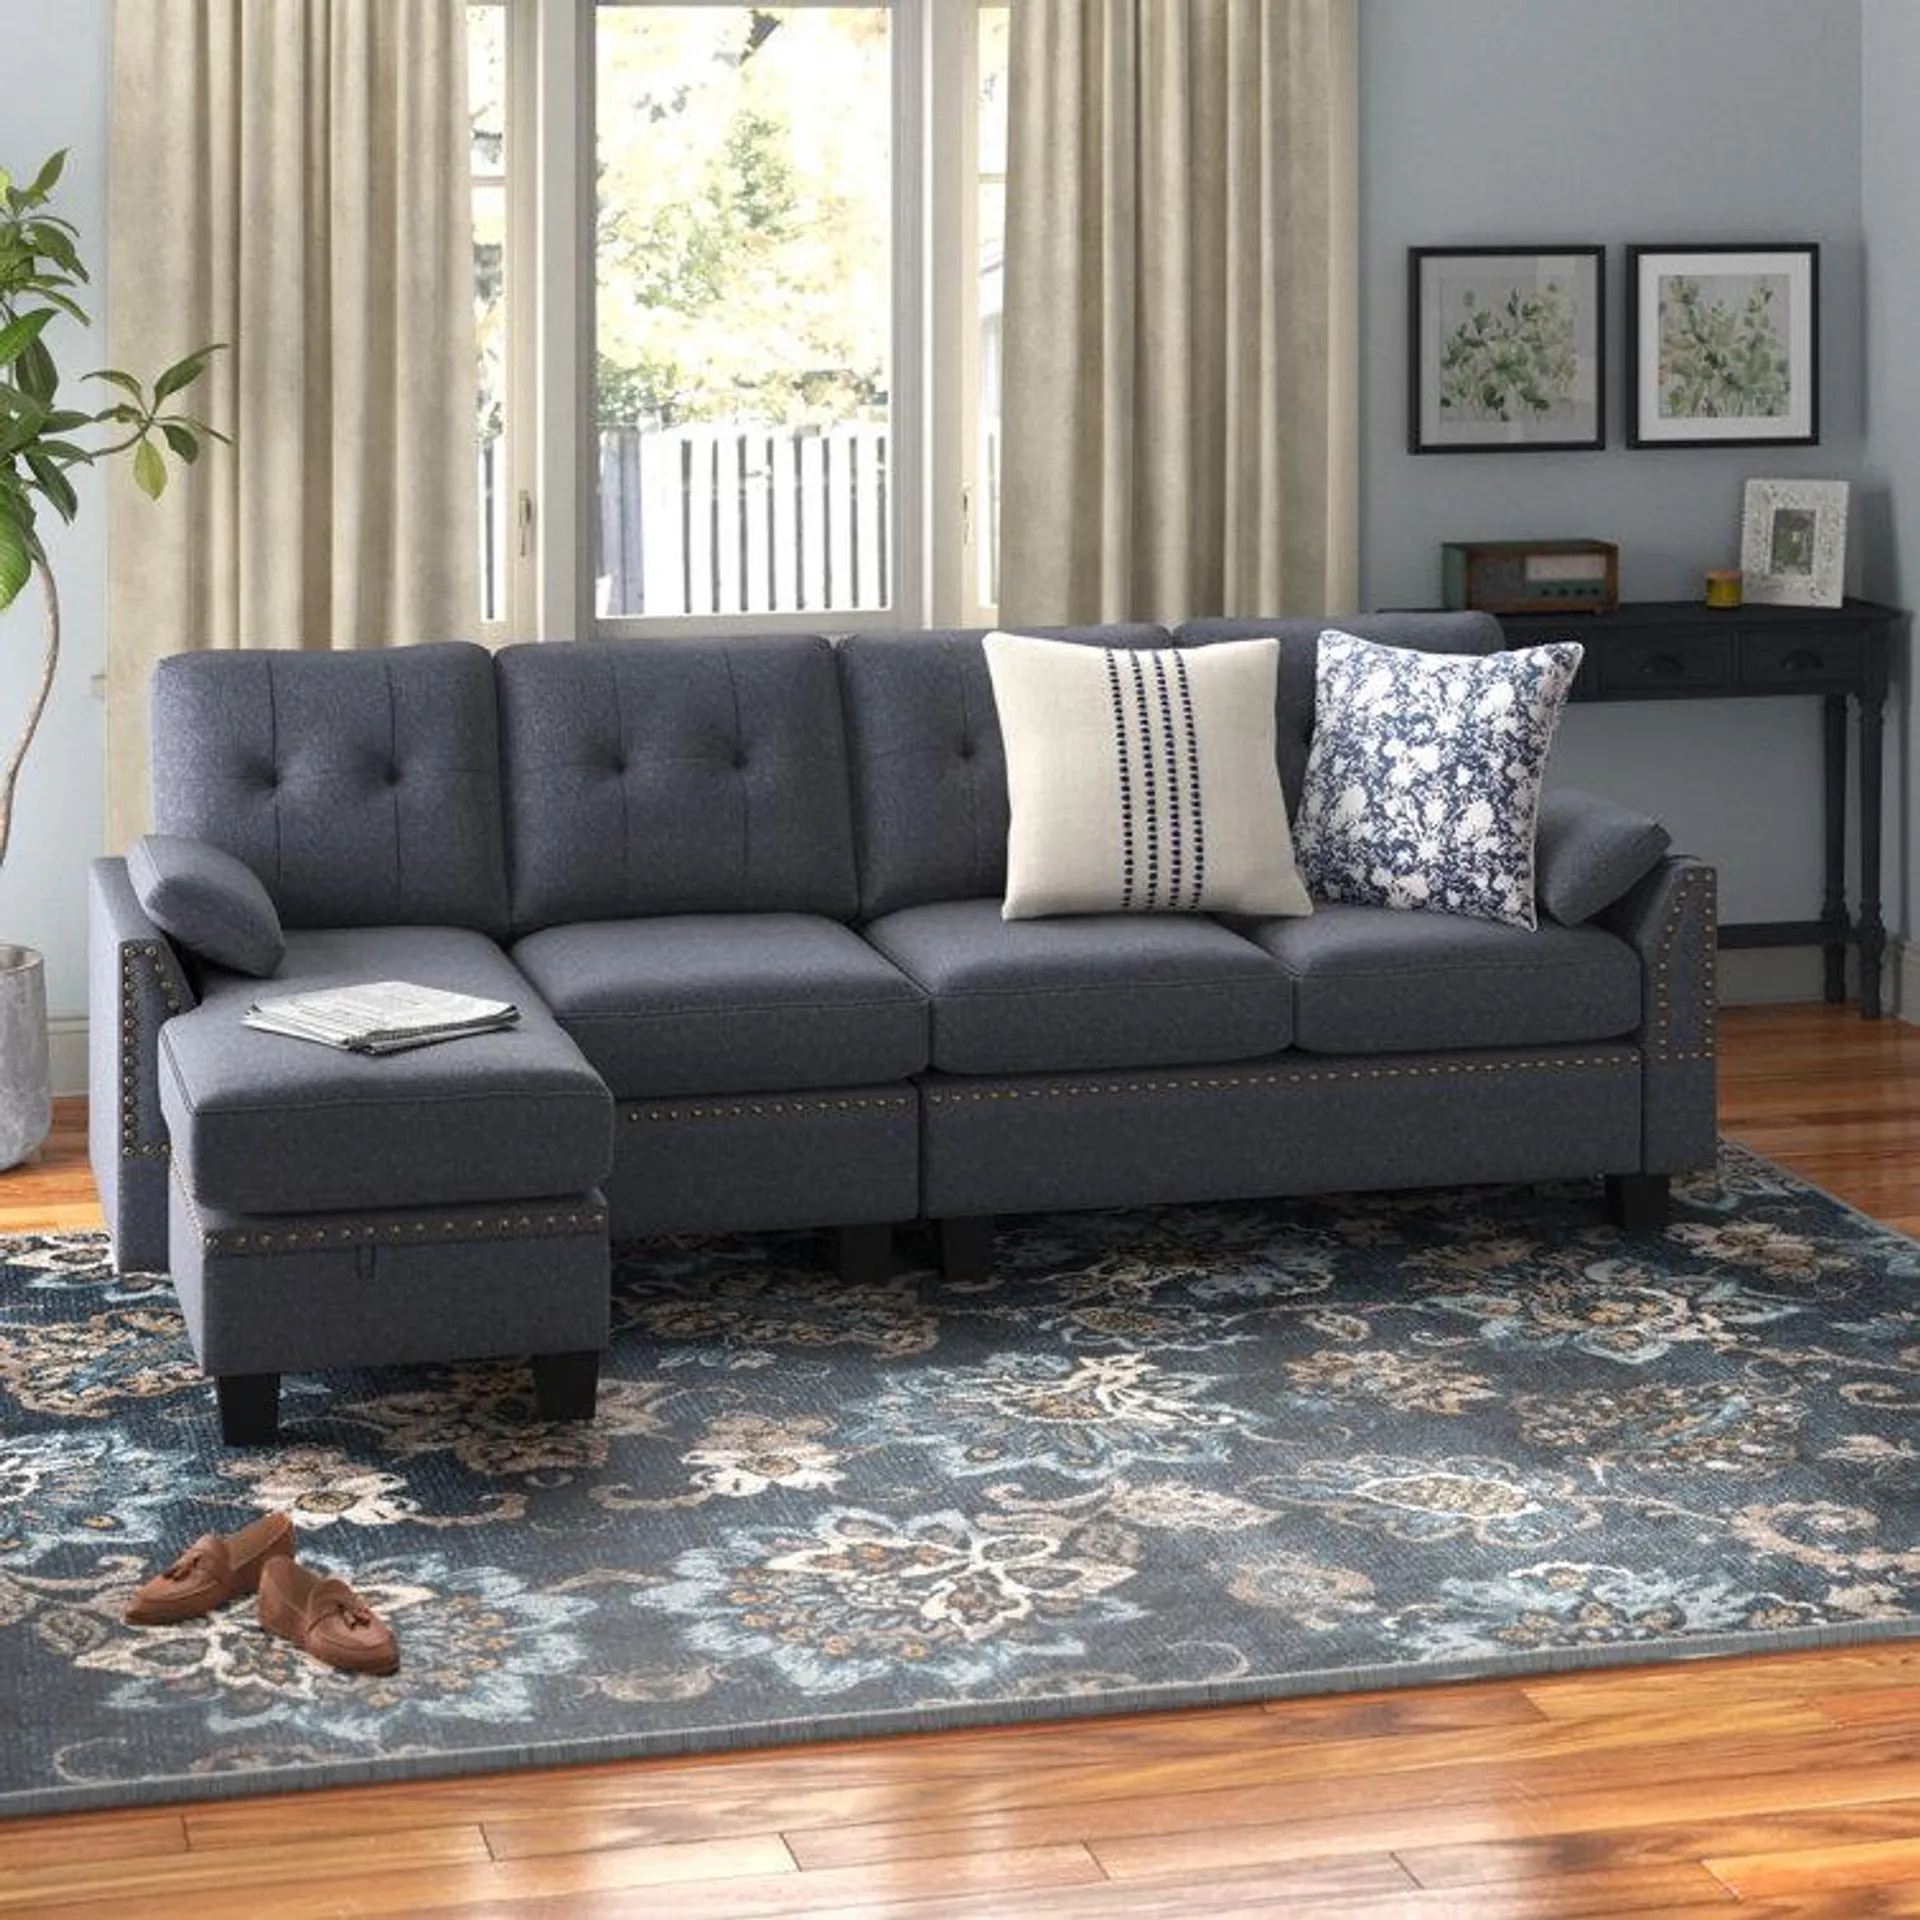 Campbelltown 3 - Piece Upholstered Sectional